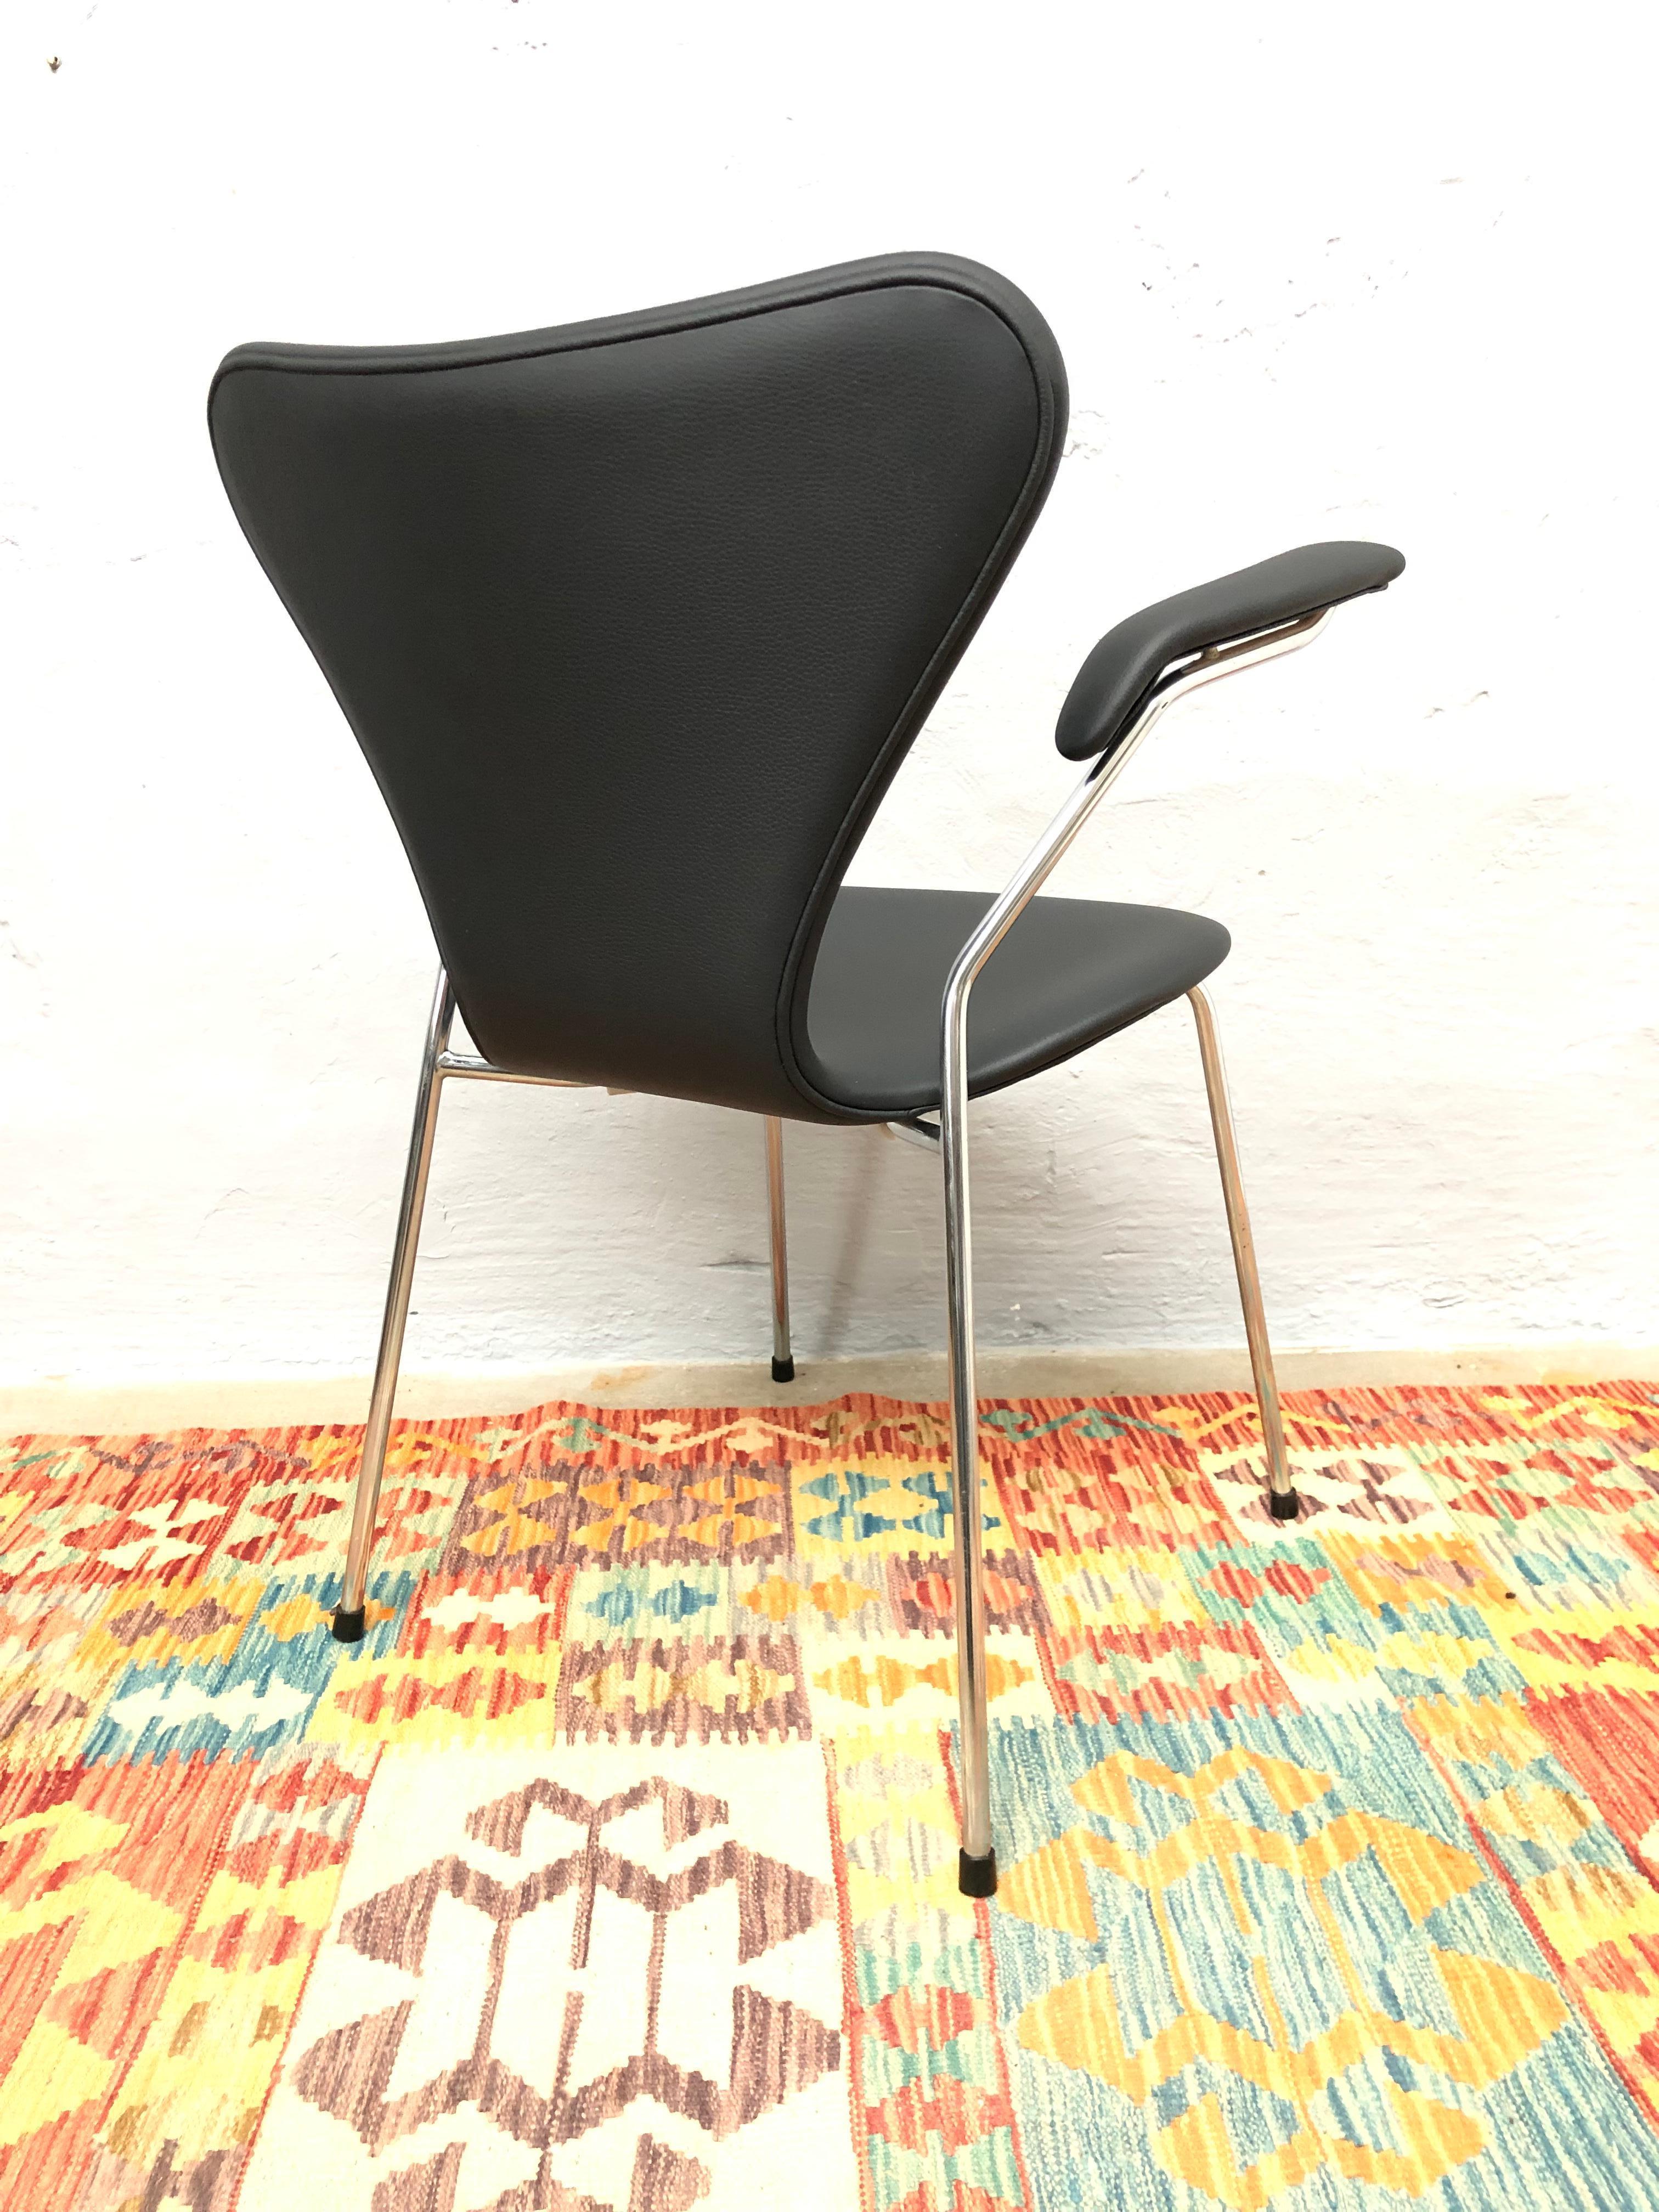 Late 20th Century Vintage Set of 6 Iconic Arne Jacobsen 3207 Chairs Designed in 1955